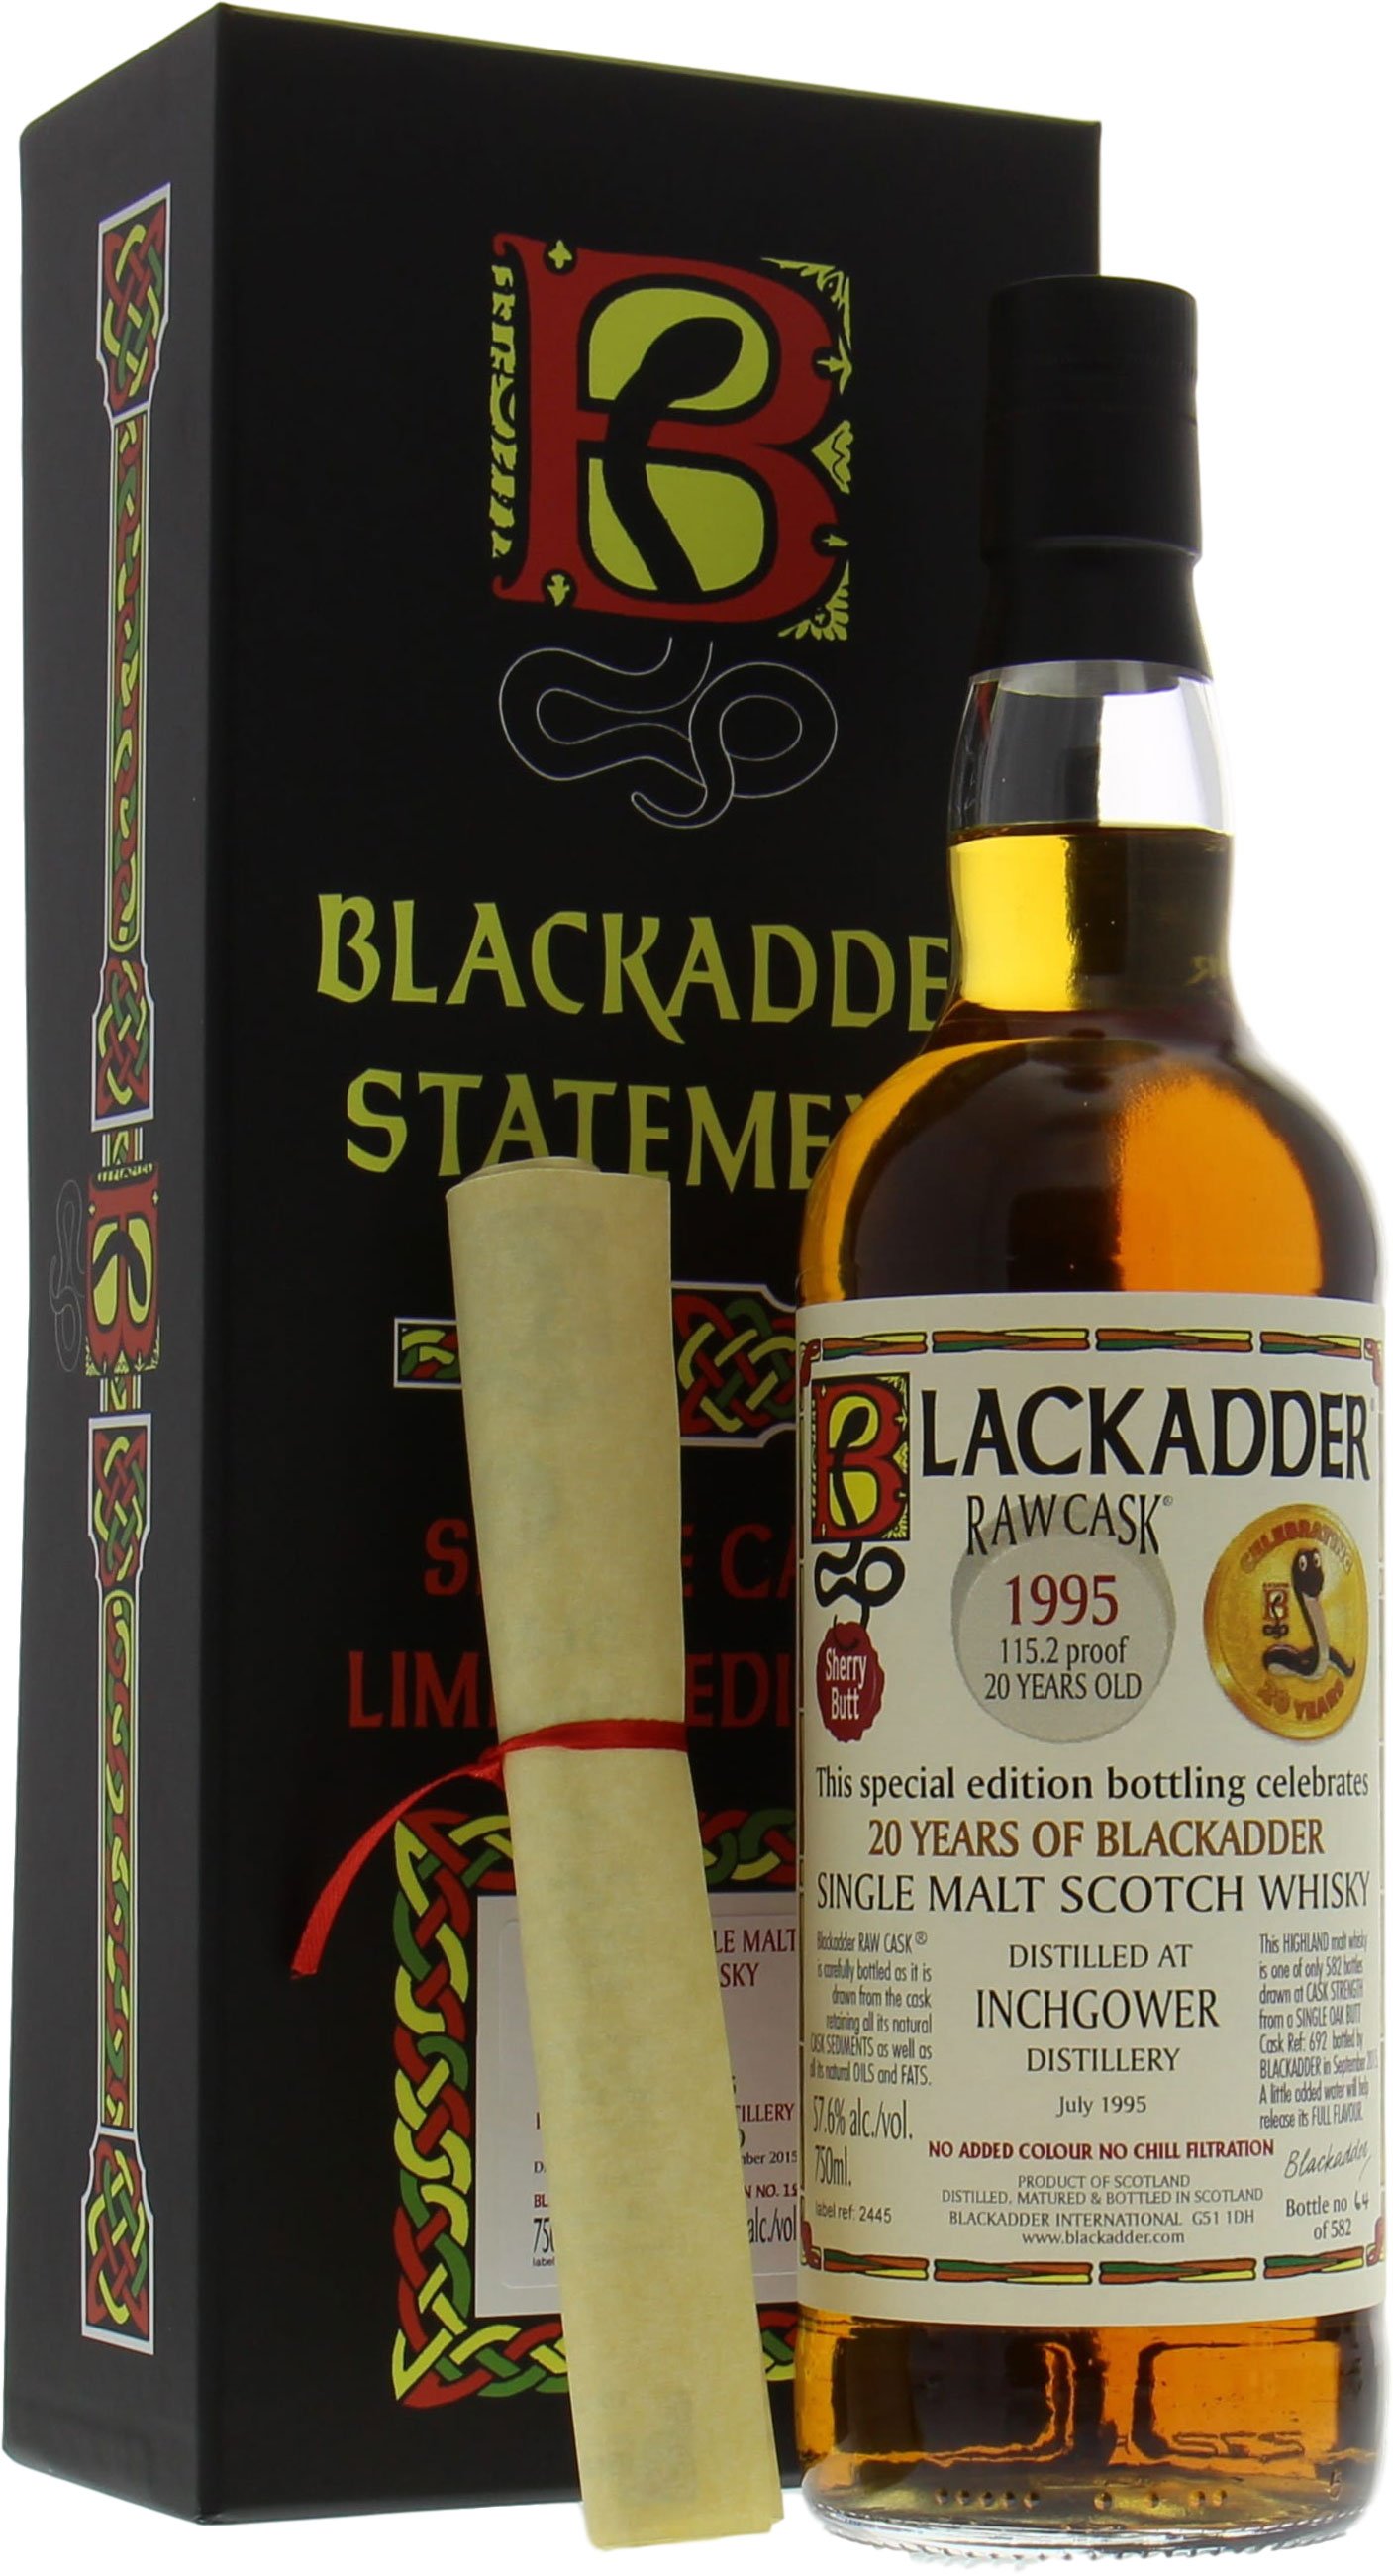 Inchgower - 20 Years Old Celebration 20 Years of Blackadder Raw Cask:692 57,6% 1995